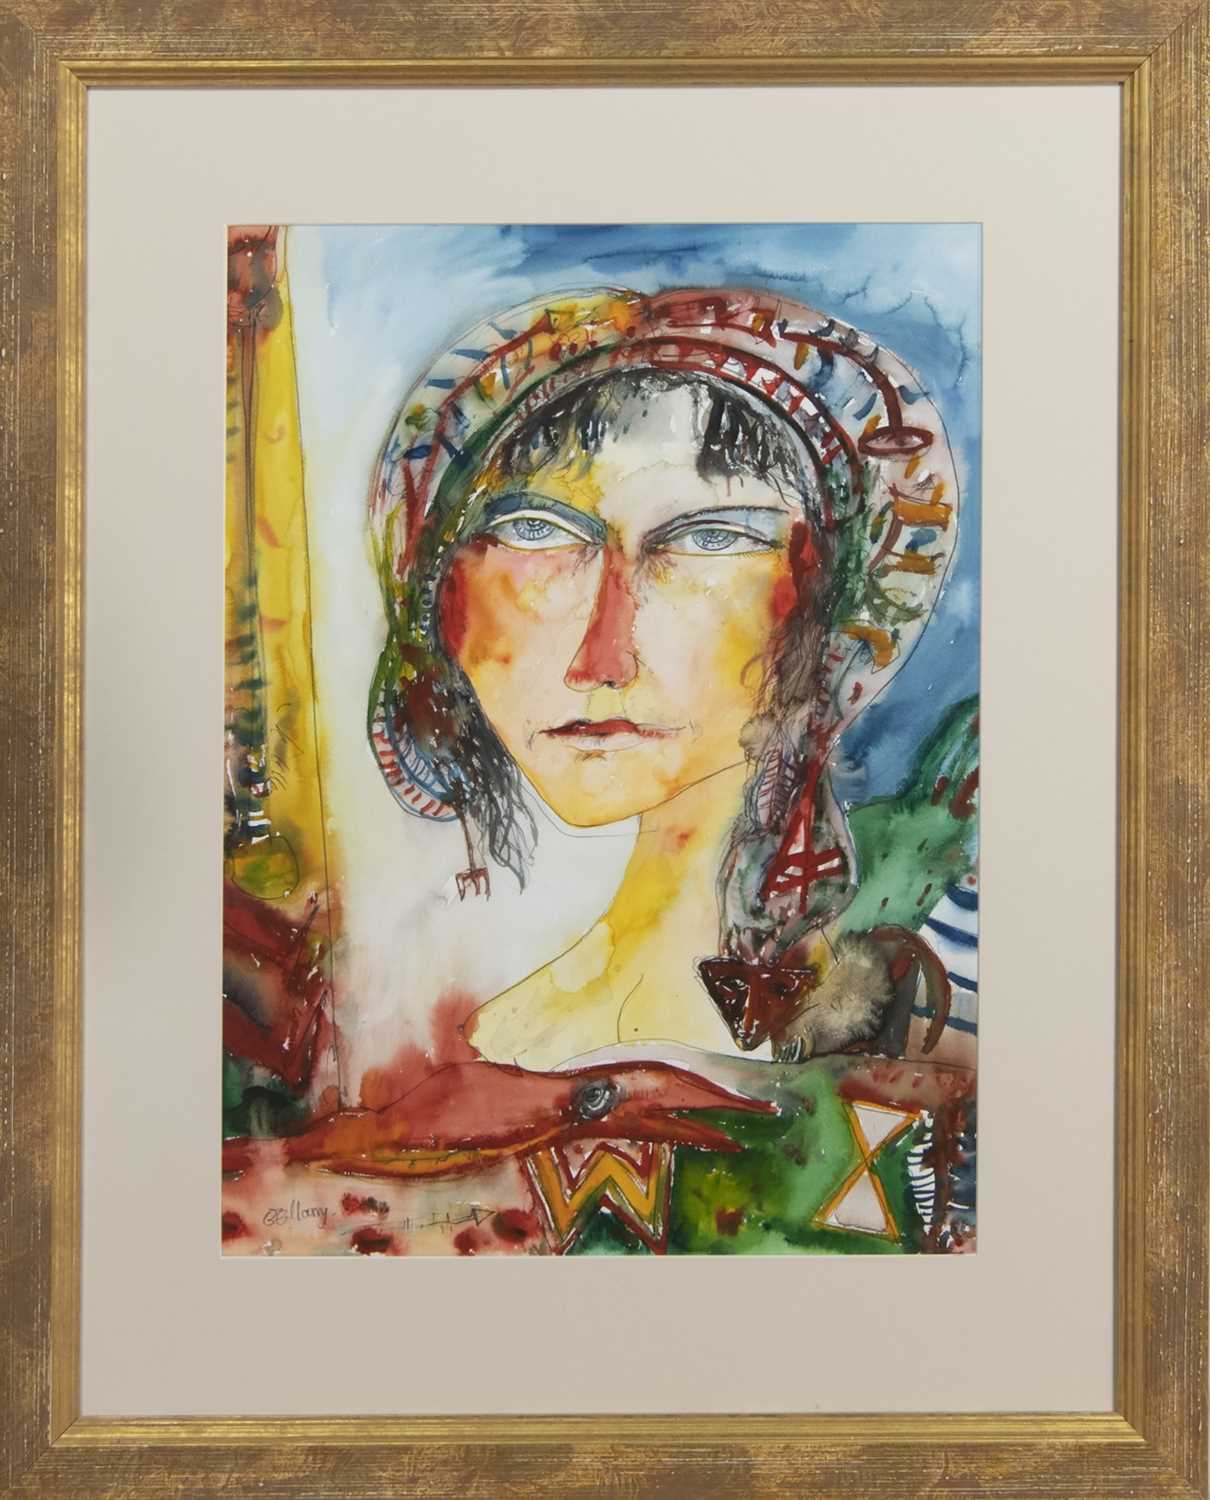 Lot 520 - WOMAN WITH CAT, A WATERCOLOUR BY JOHN BELLANY